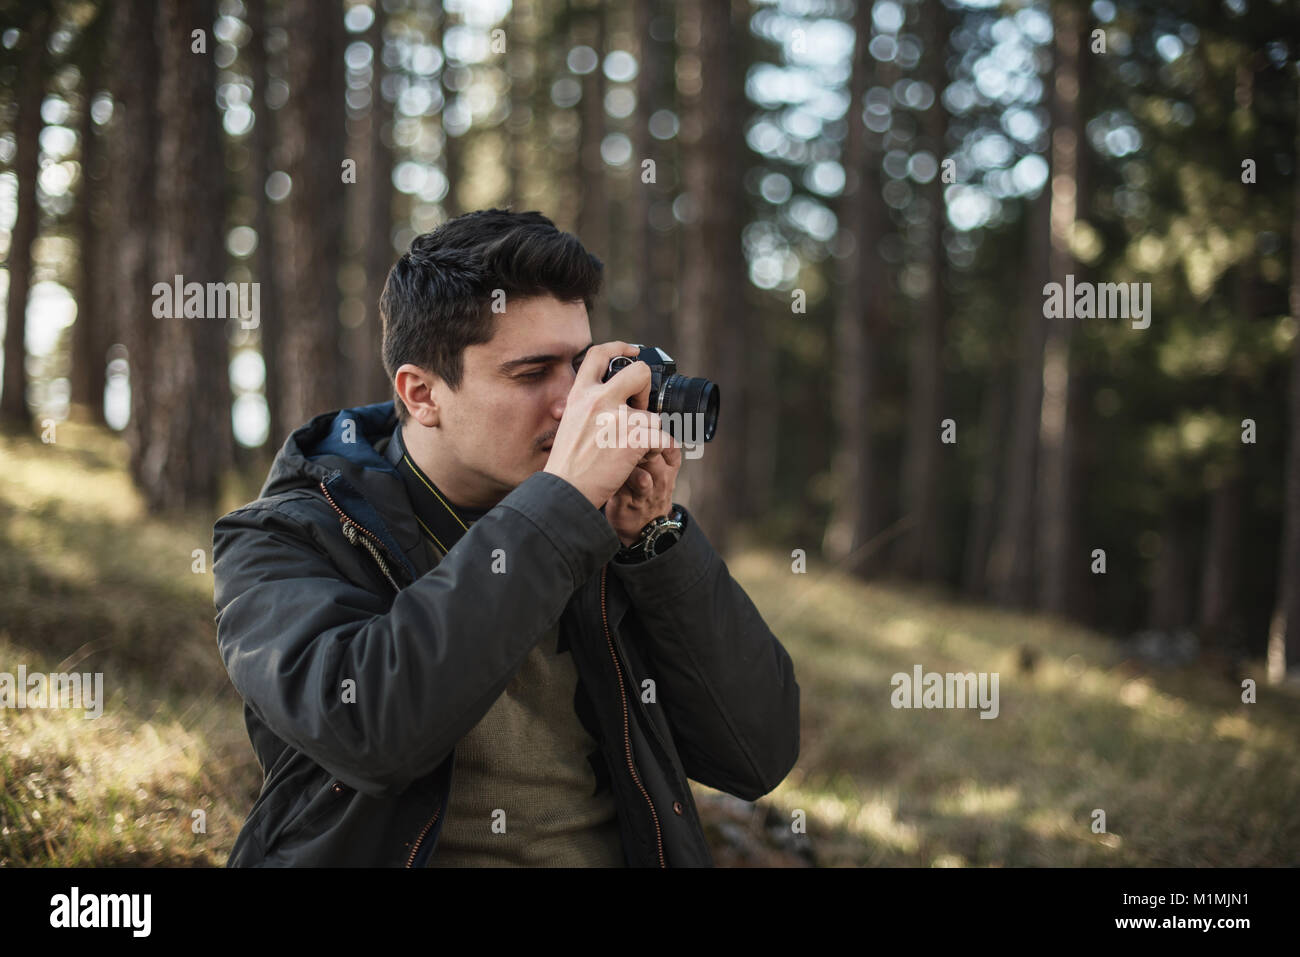 Man standing in forest taking photos Stock Photo